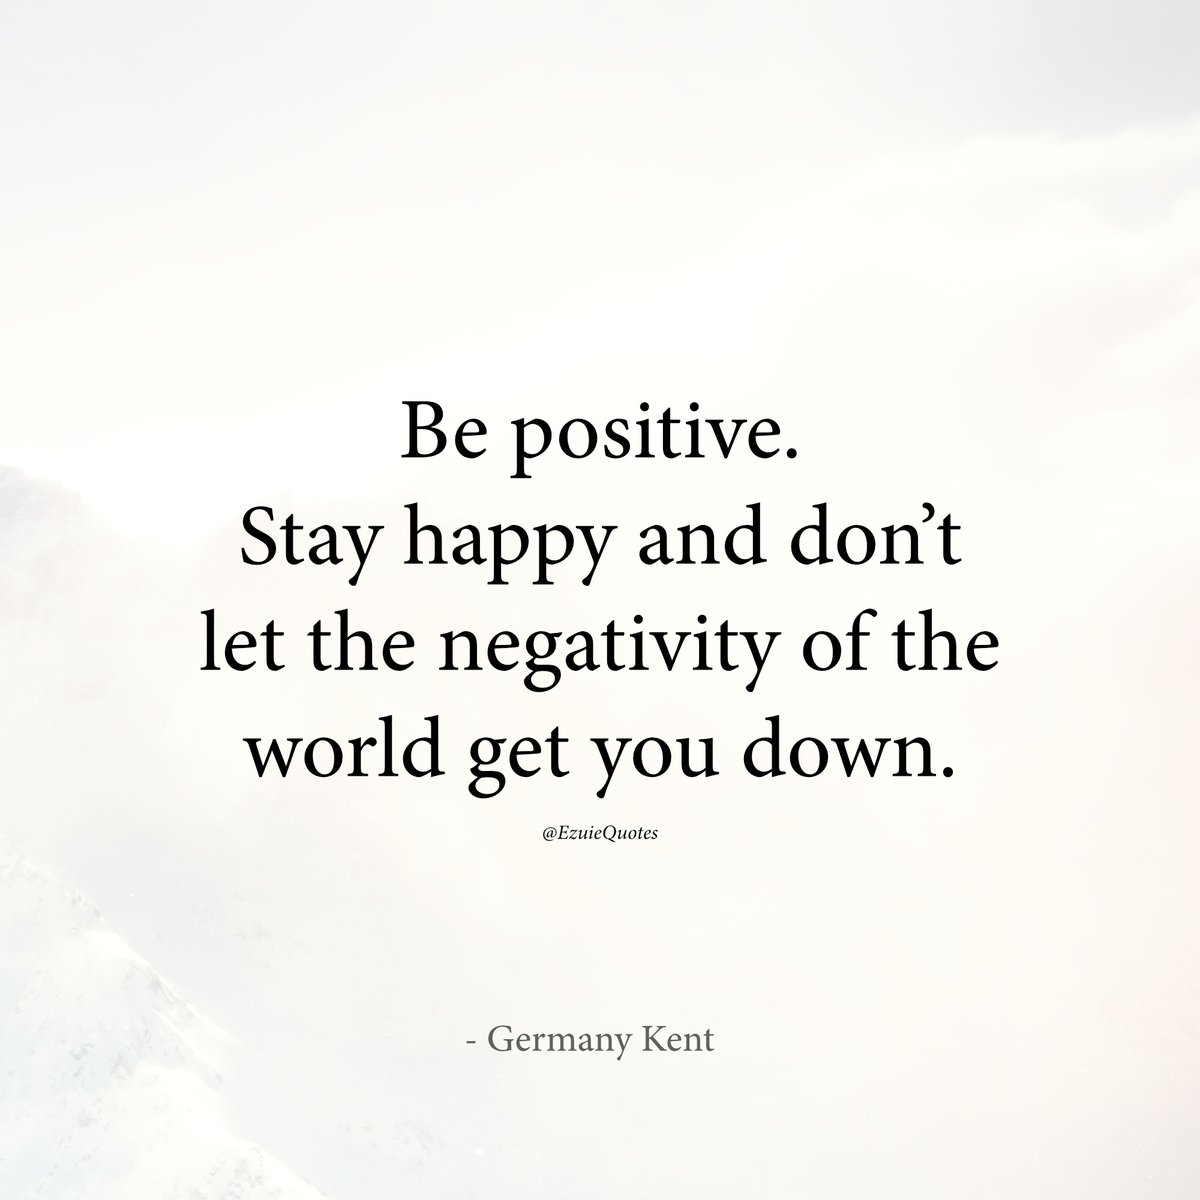 Be Positive and Stay happy!

#quotes #qouteoftheday #ImranKhanPTI